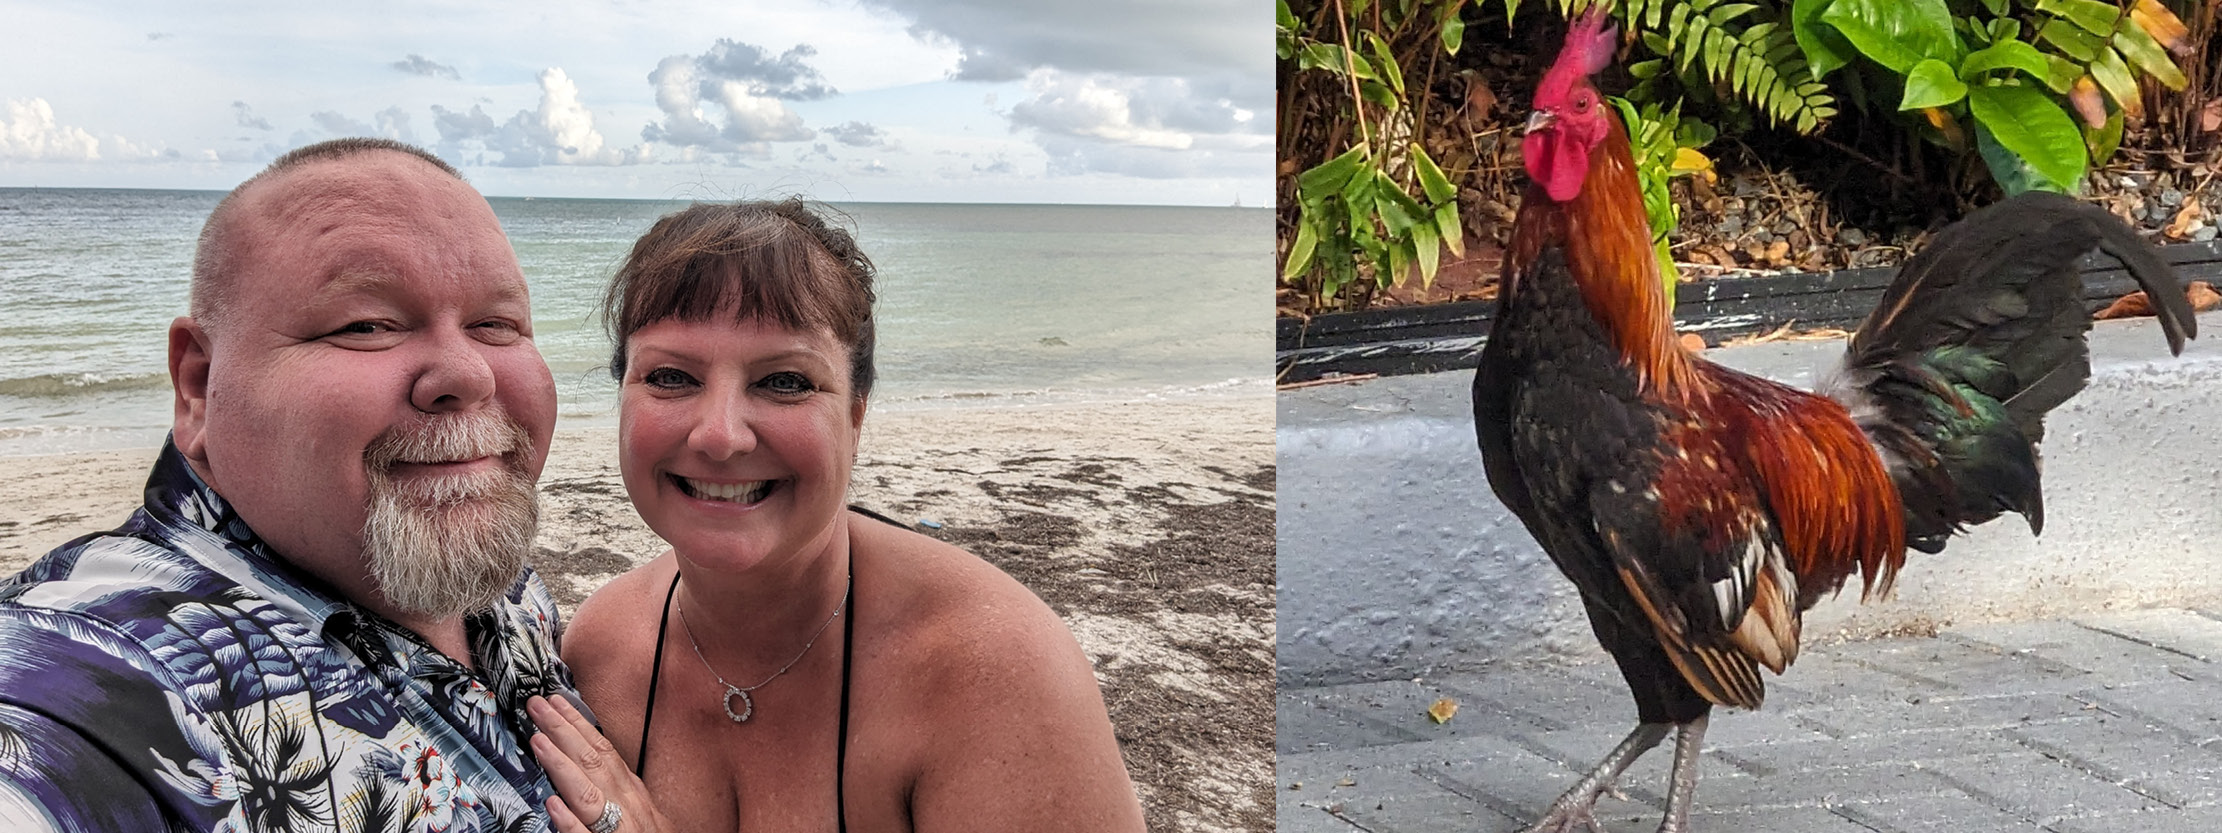 Left: photo of man and woman on beach; right: rooster